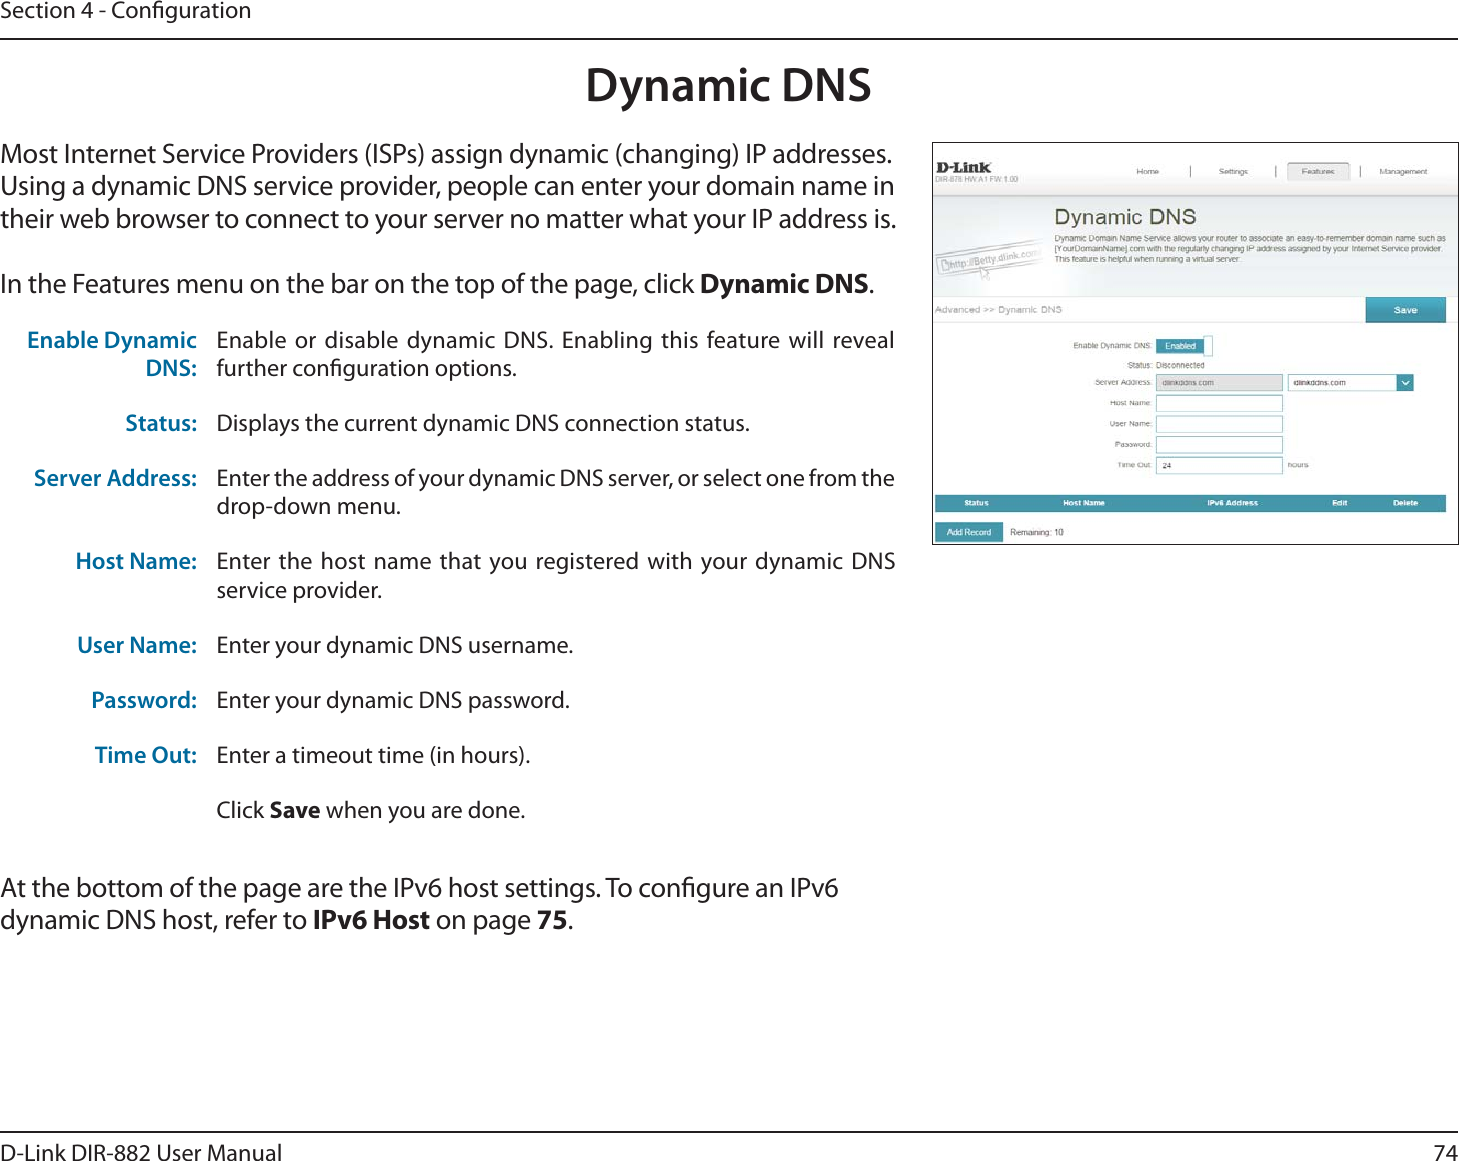 74D-Link DIR-882 User ManualSection 4 - CongurationDynamic DNSMost Internet Service Providers (ISPs) assign dynamic (changing) IP addresses. Using a dynamic DNS service provider, people can enter your domain name in their web browser to connect to your server no matter what your IP address is.In the Features menu on the bar on the top of the page, click Dynamic DNS.At the bottom of the page are the IPv6 host settings. To congure an IPv6 dynamic DNS host, refer to IPv6 Host on page 75.Enable Dynamic DNS:Enable or disable dynamic DNS. Enabling this feature will reveal further conguration options.Status: Displays the current dynamic DNS connection status.Server Address: Enter the address of your dynamic DNS server, or select one from the drop-down menu.Host Name: Enter the host name that you registered with your dynamic DNS service provider.User Name: Enter your dynamic DNS username.Password: Enter your dynamic DNS password.Time Out: Enter a timeout time (in hours).Click Save when you are done.